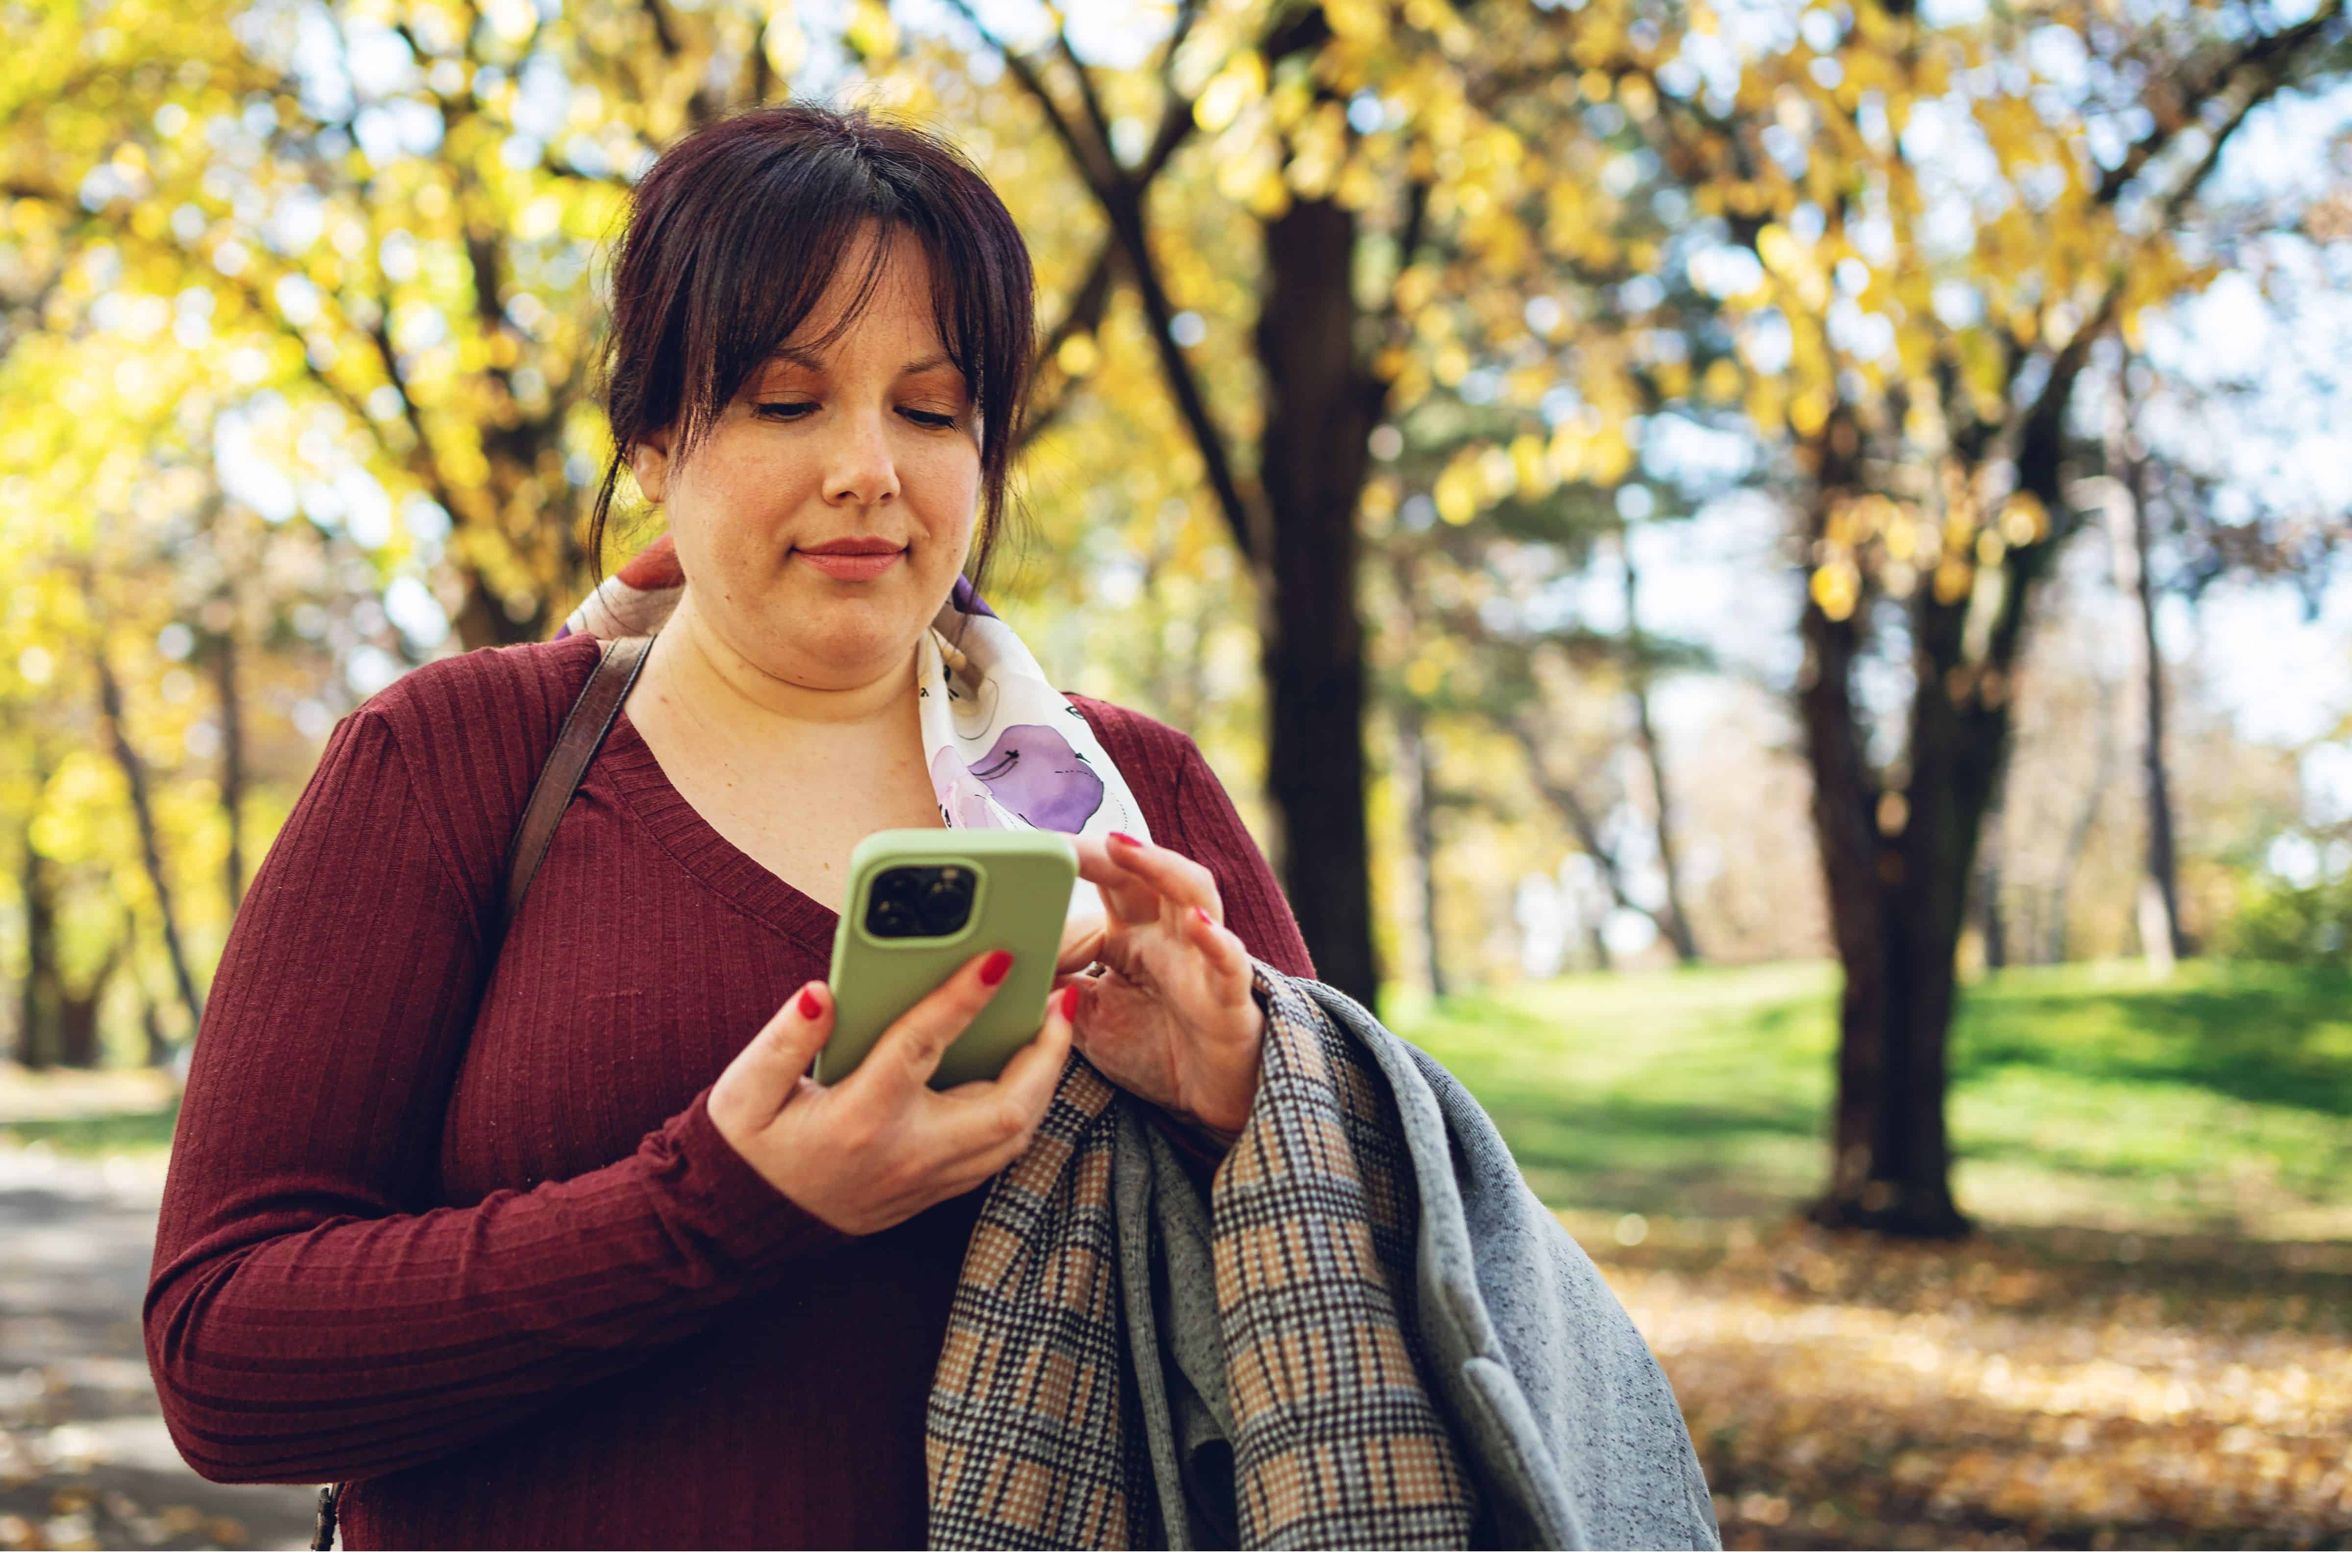 A woman with dark hair in a sweater using a smartphone in the park